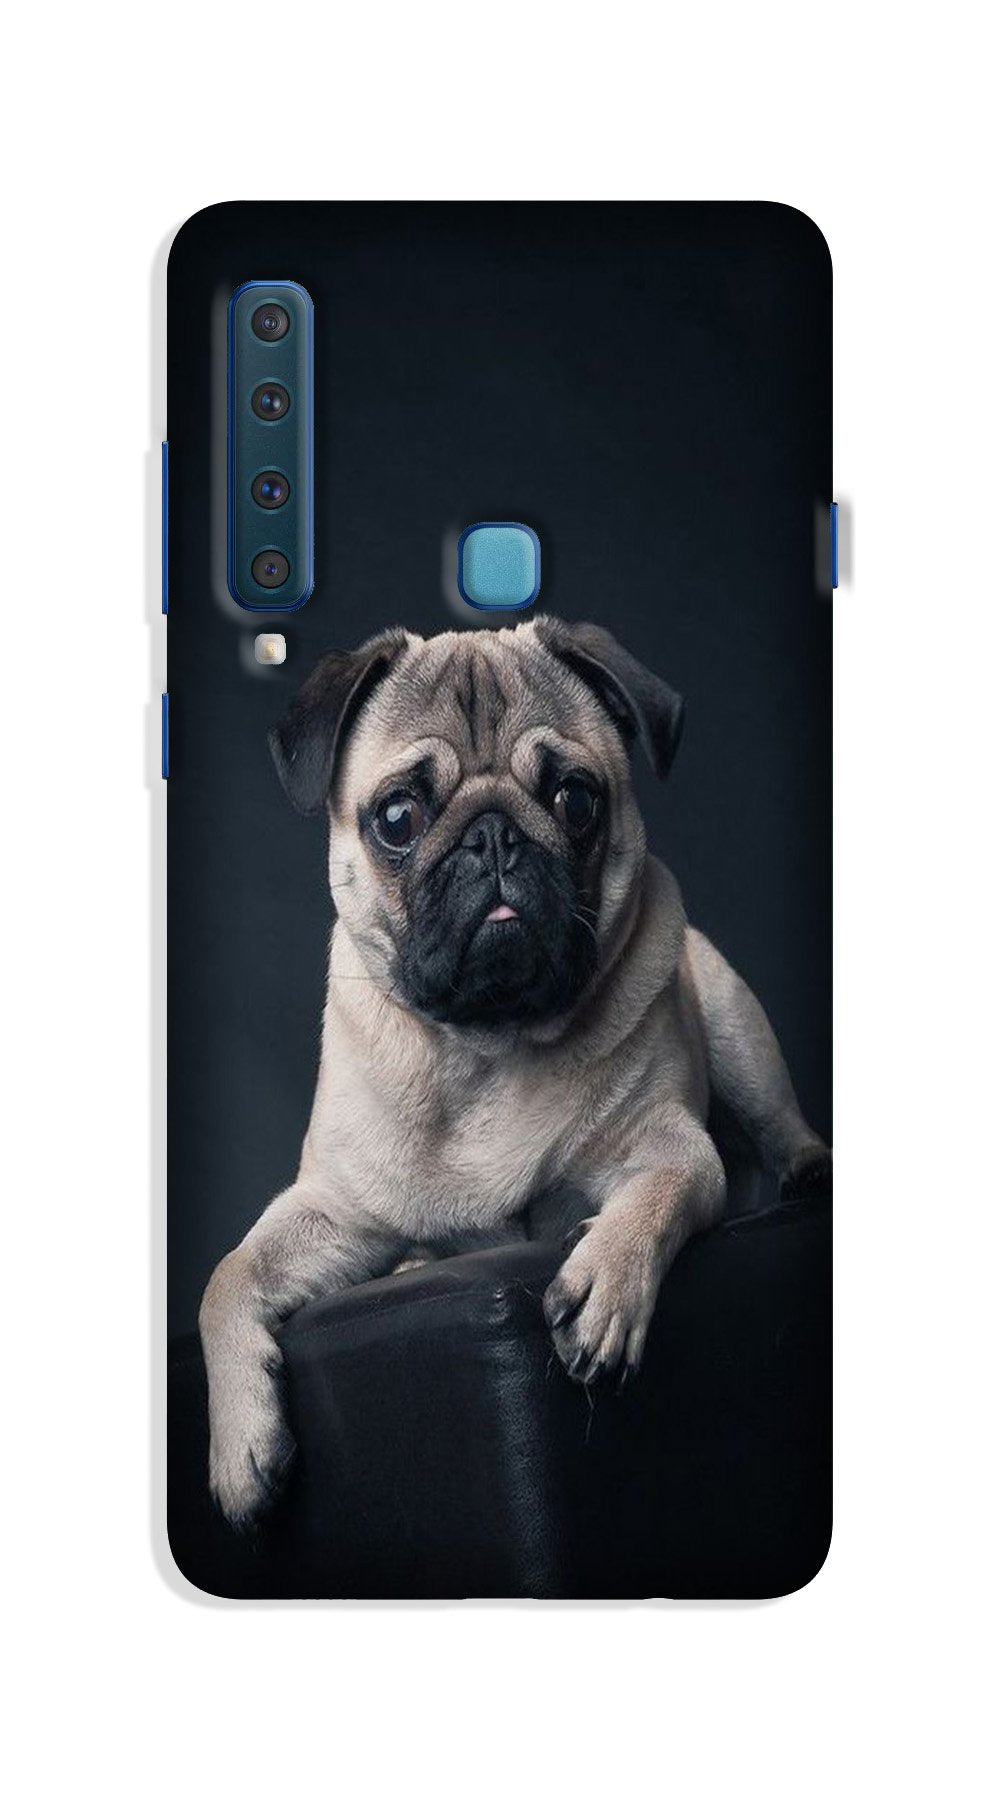 little Puppy Case for Galaxy A9 (2018)